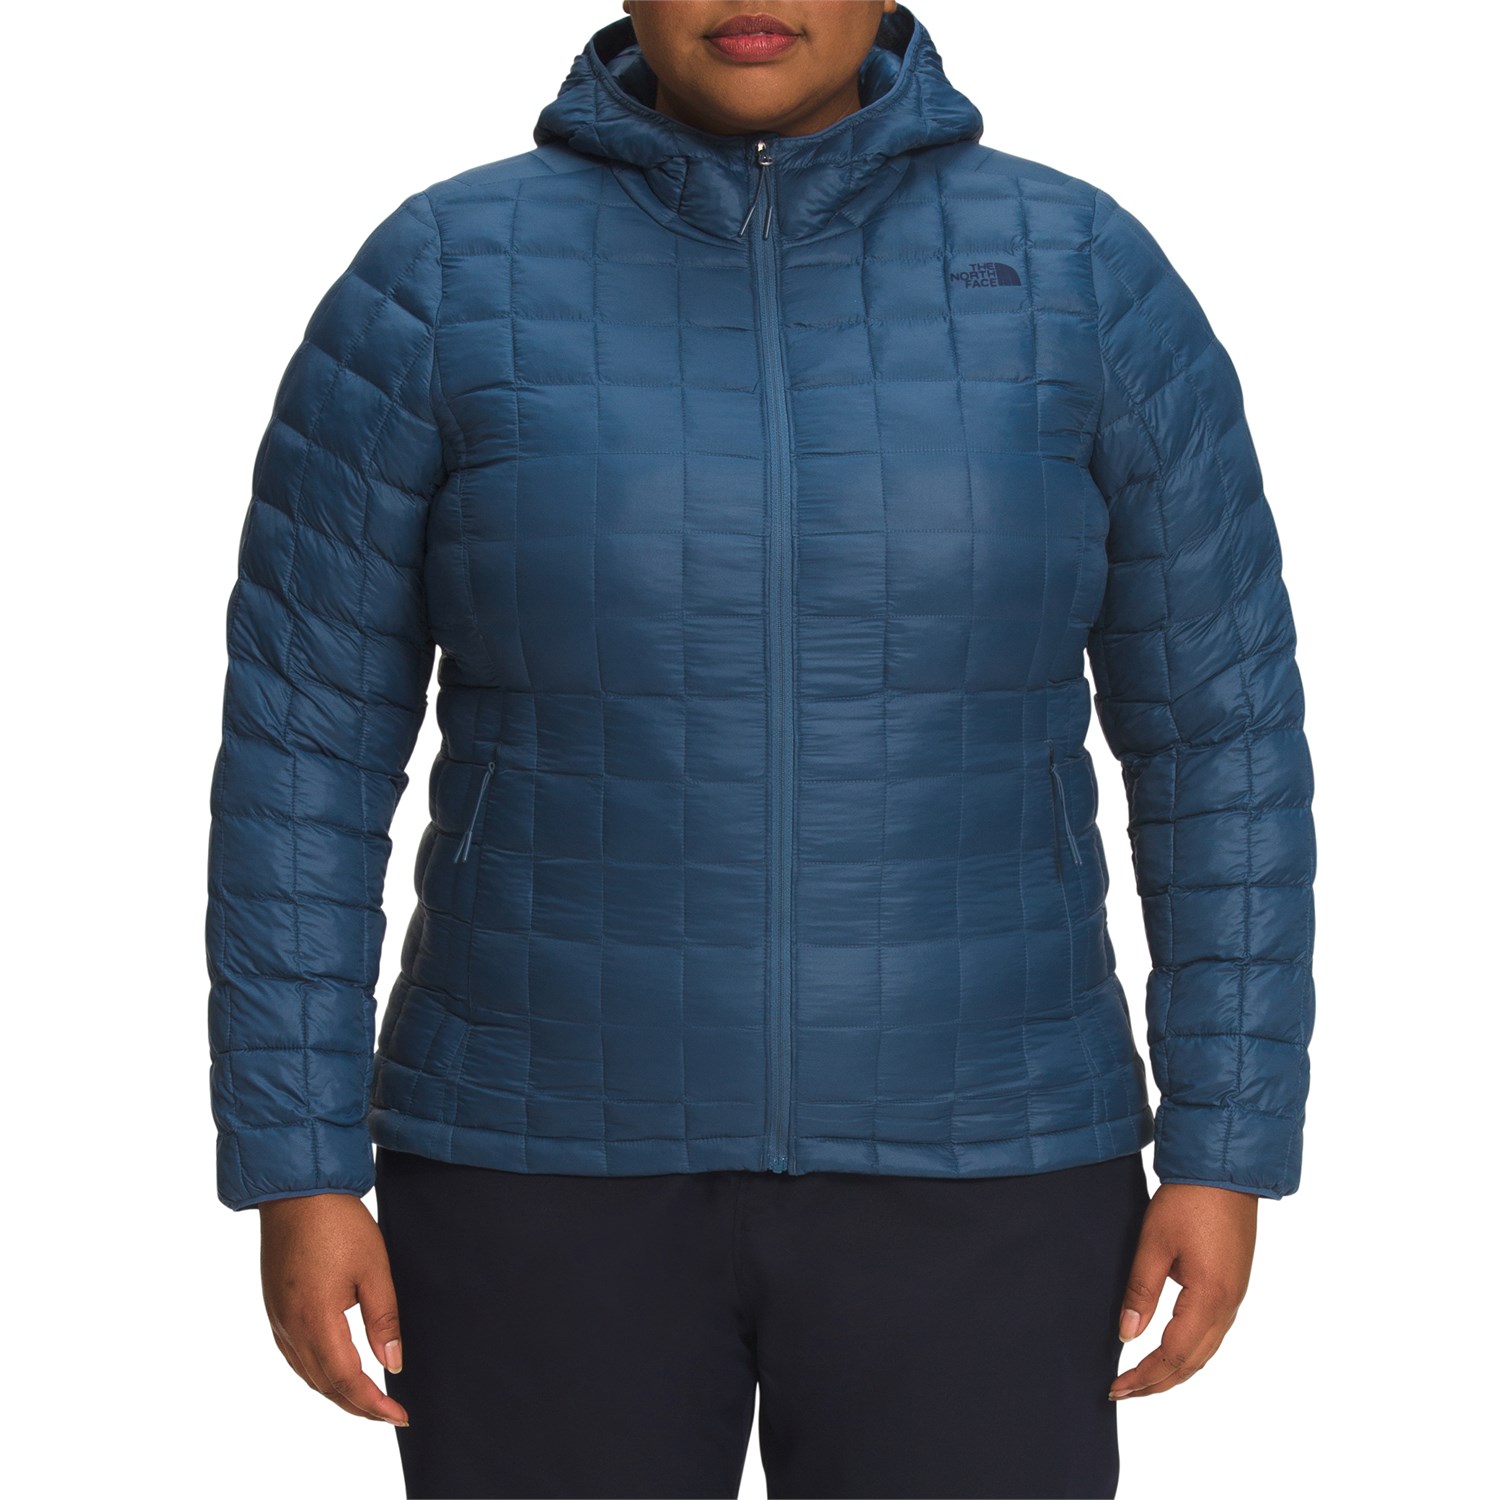 Худи The North Face ThermoBall Eco 2.0 Plus, цвет Shady Blue куртка the north face thermoball eco 2 0 plus цвет dark sage